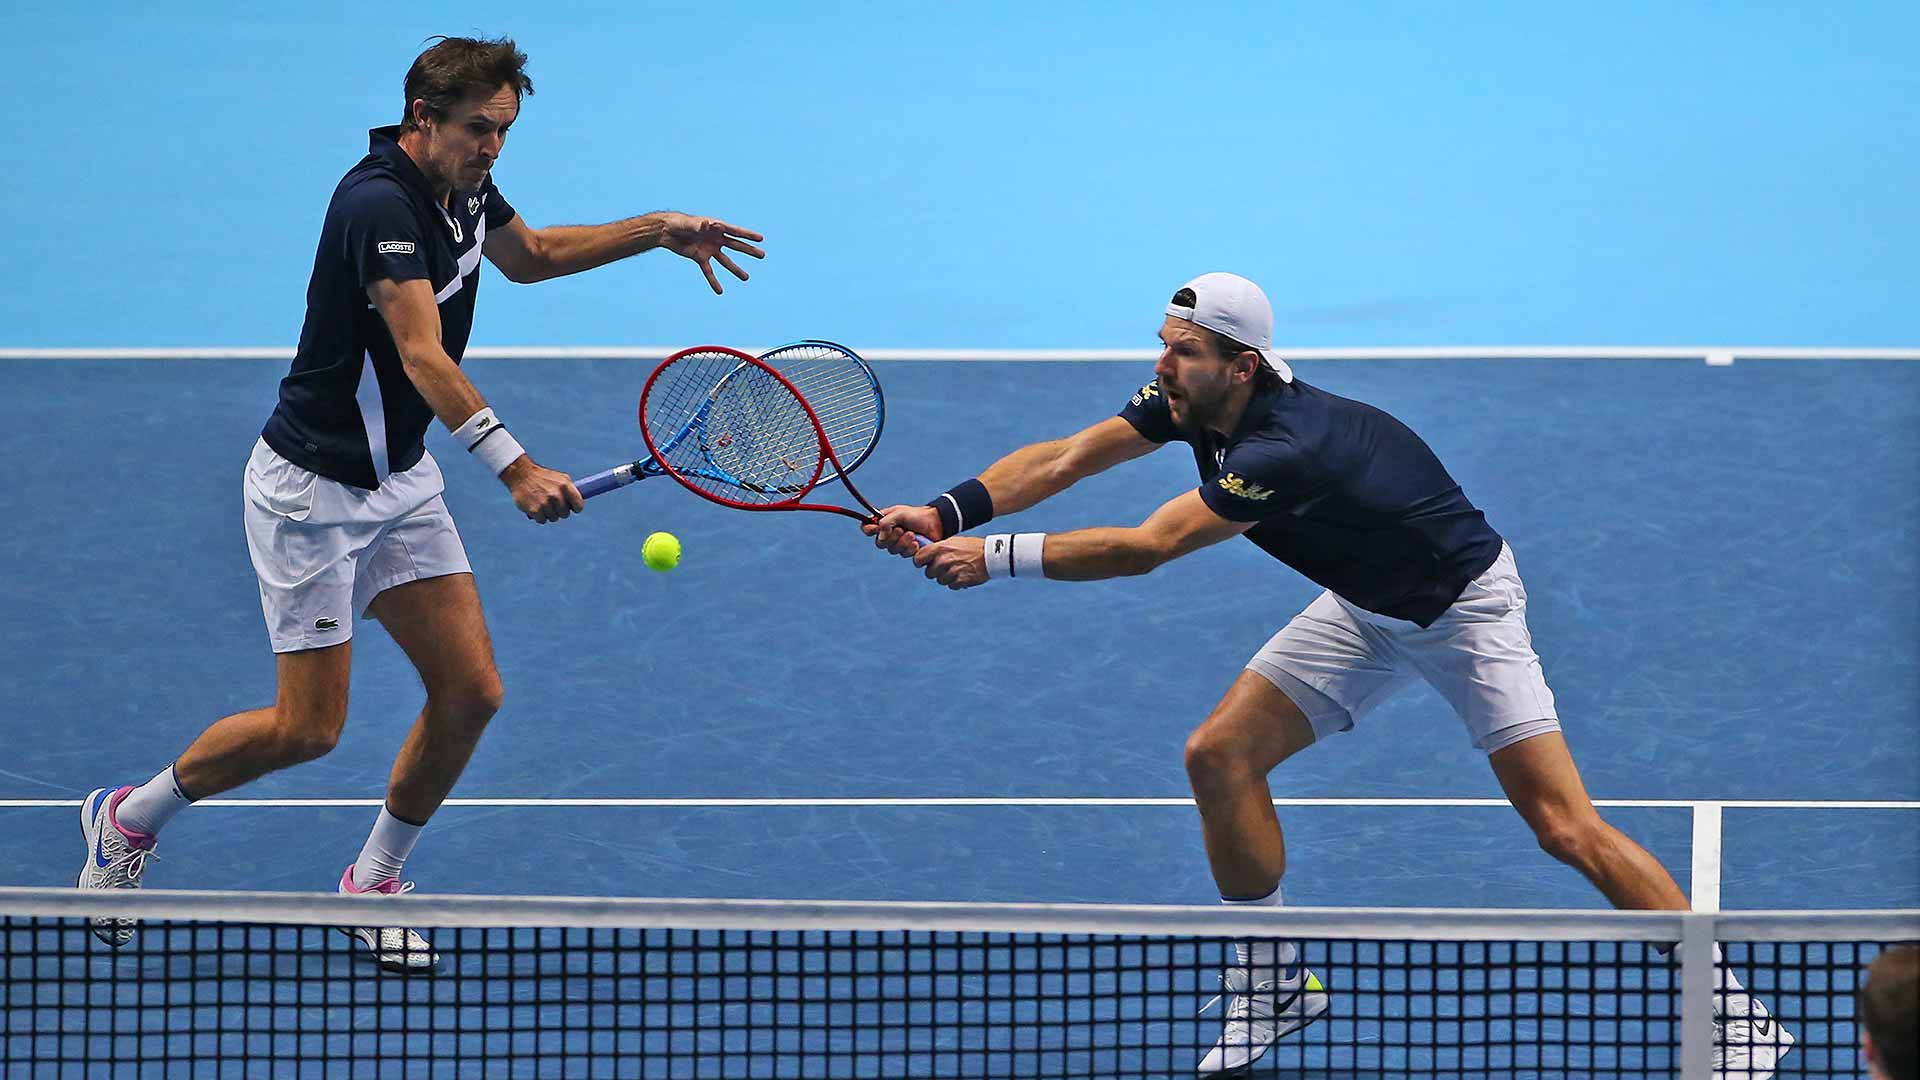 Jurgen Melzer (right) and Edouard Roger-Vasselin (left) will face Wesley Koolhof and Nikola Mektic for the Nitto ATP Finals trophy.